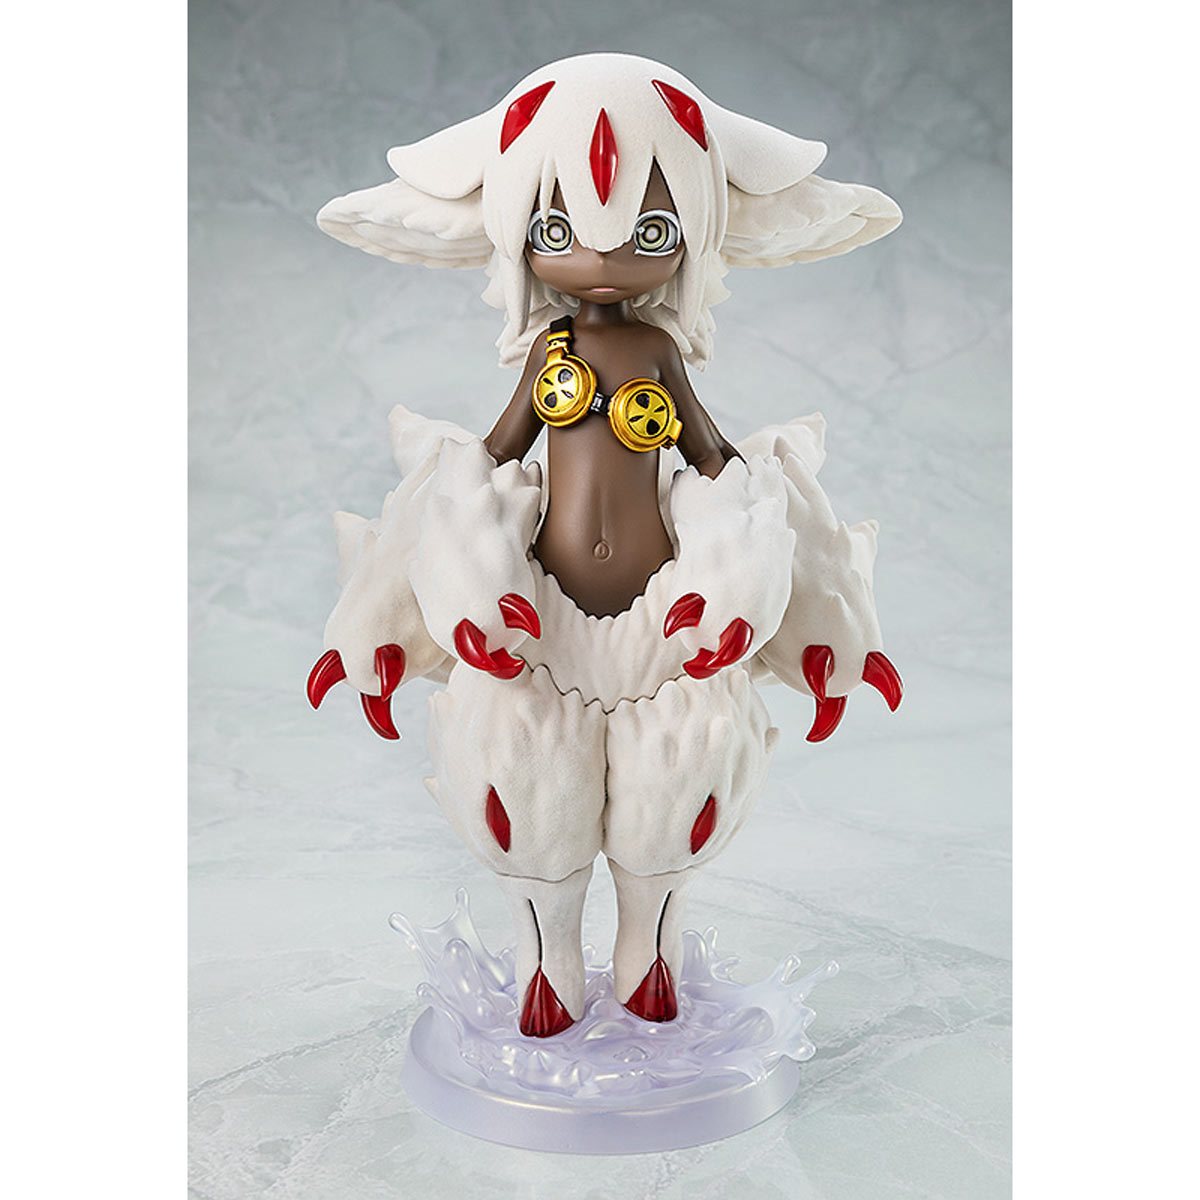 Made in Abyss: The Golden City of the Scorching Sun - Faputa 1/7th scale Figure Kadokawa